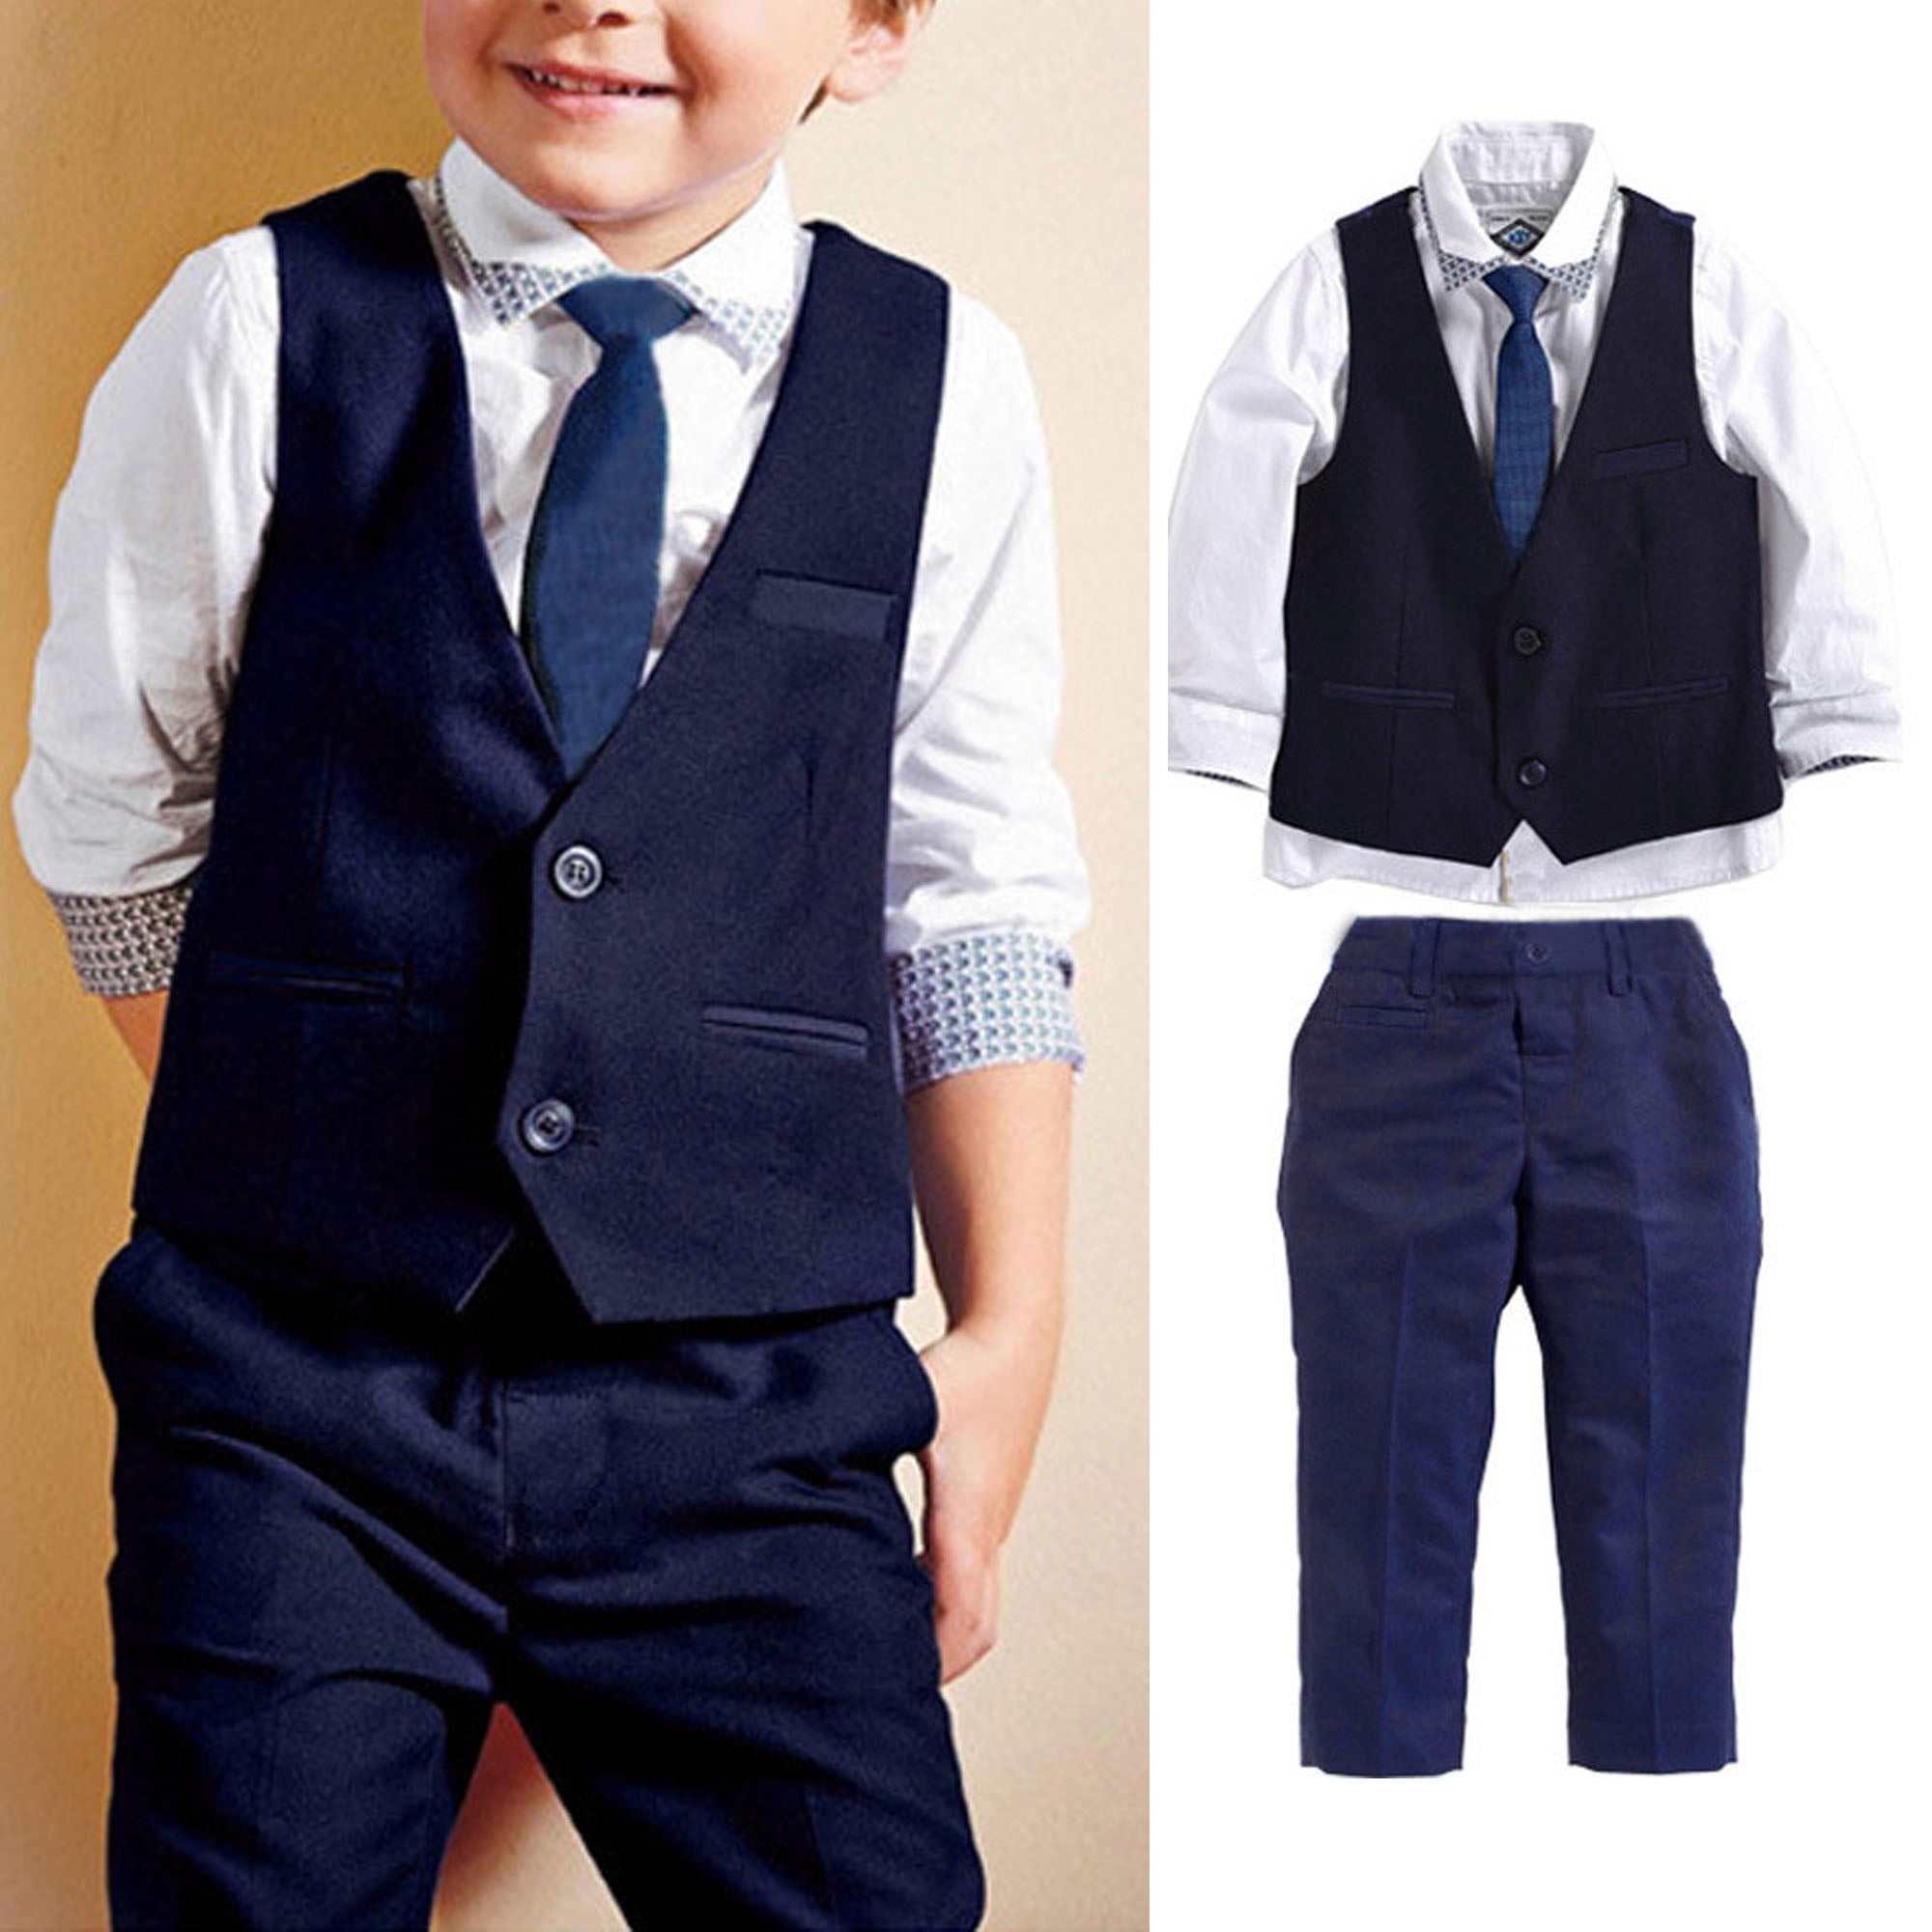 Toddler Boy 3 PC Outfit Set Casual Party Suit Size 1-4 Years Jacket+Top+trousers 